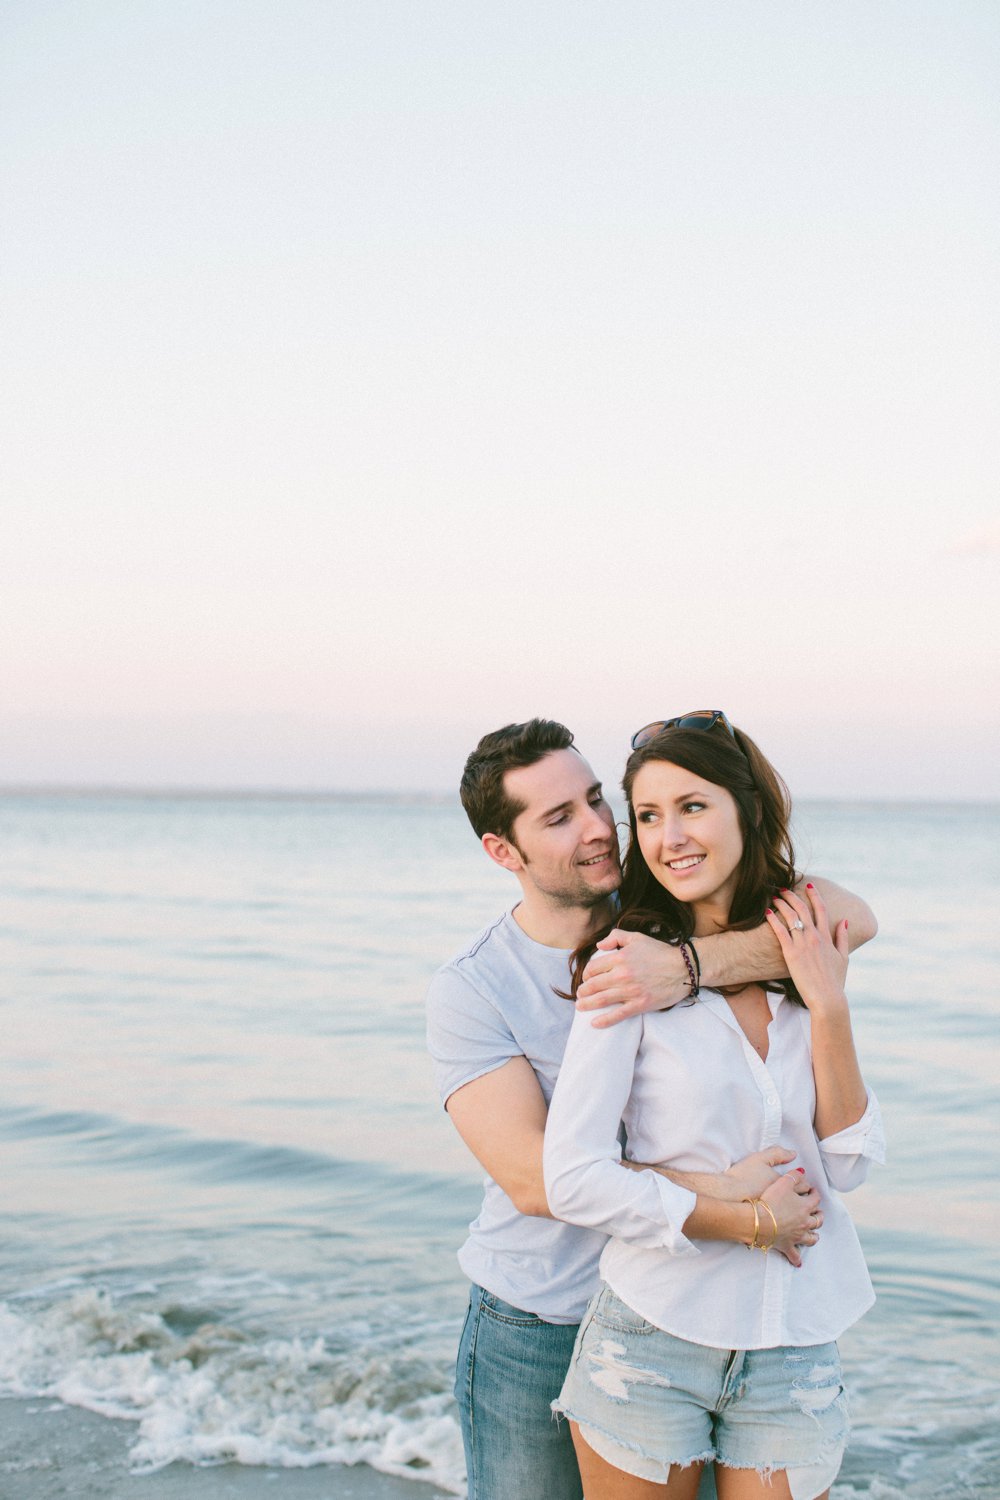 Engagement session by Taylor Rae Photography